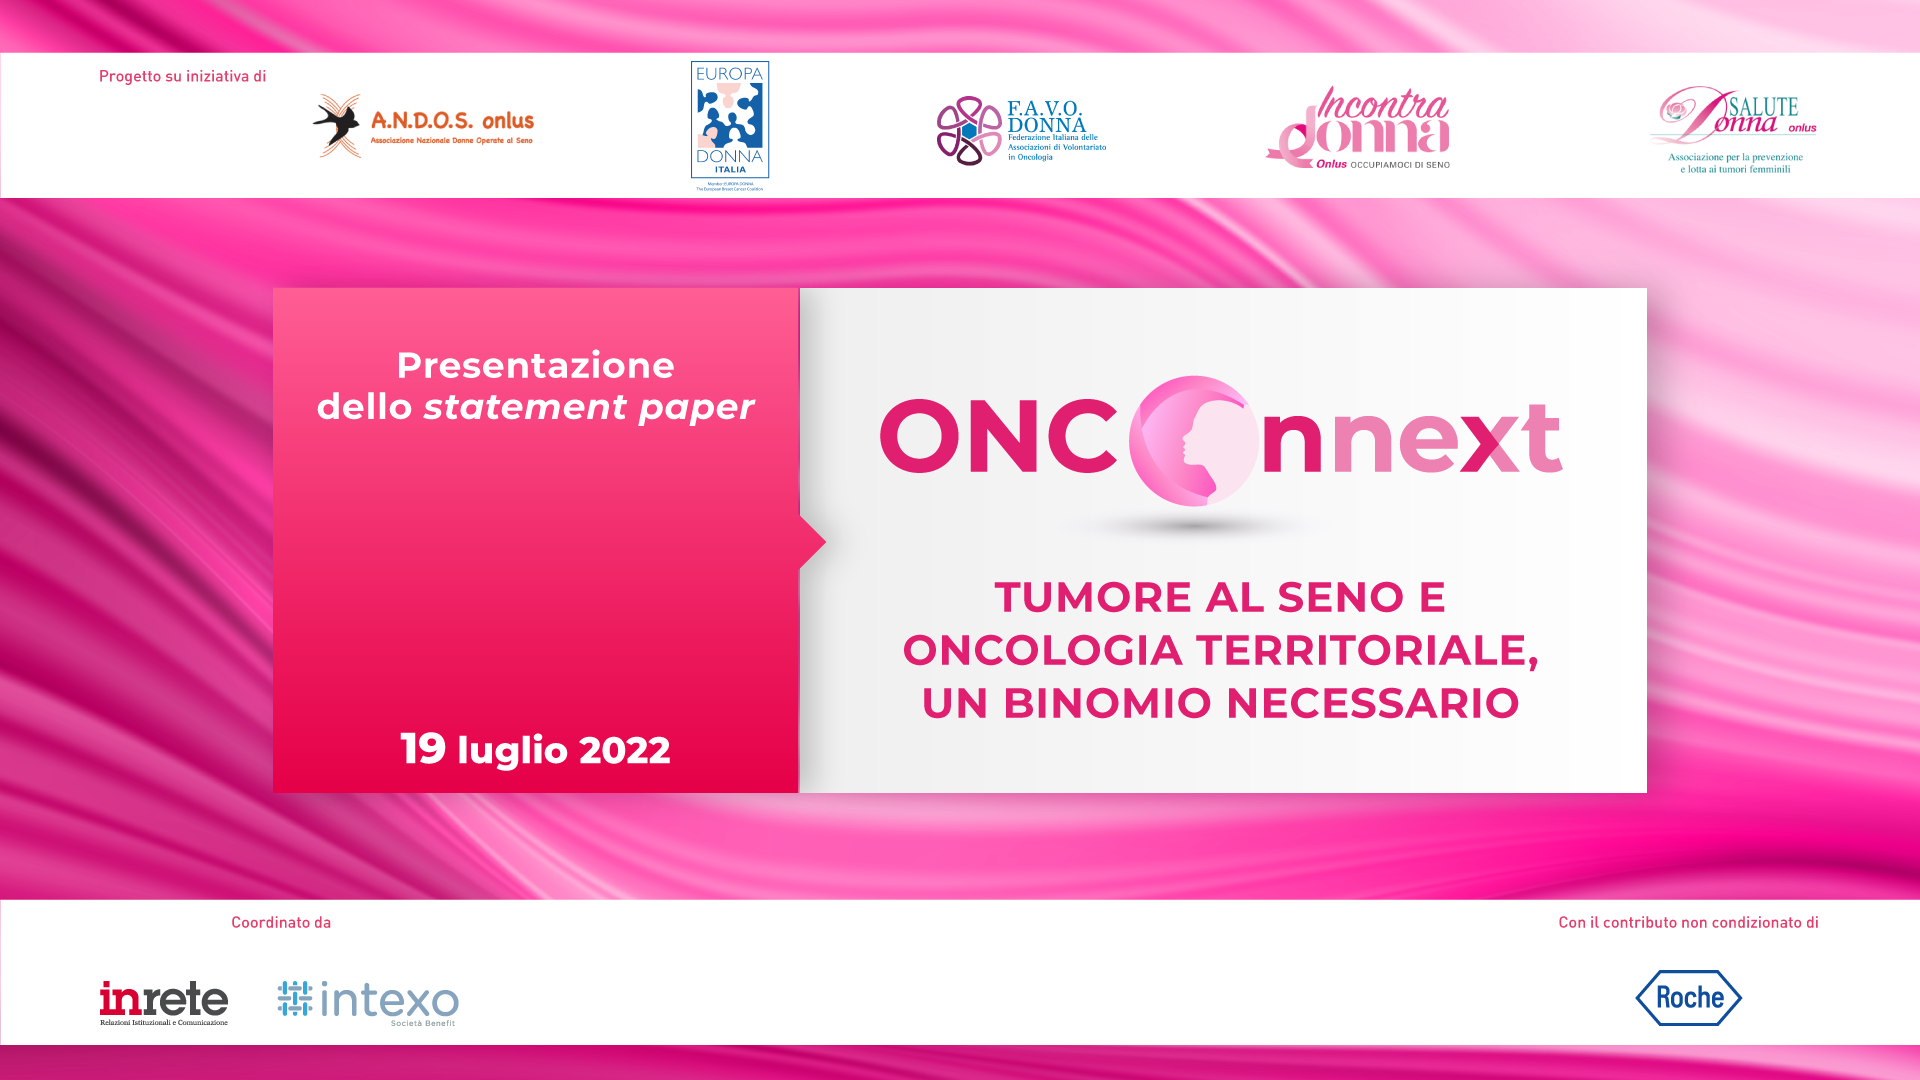 Onconnext 16 9 slide tappo